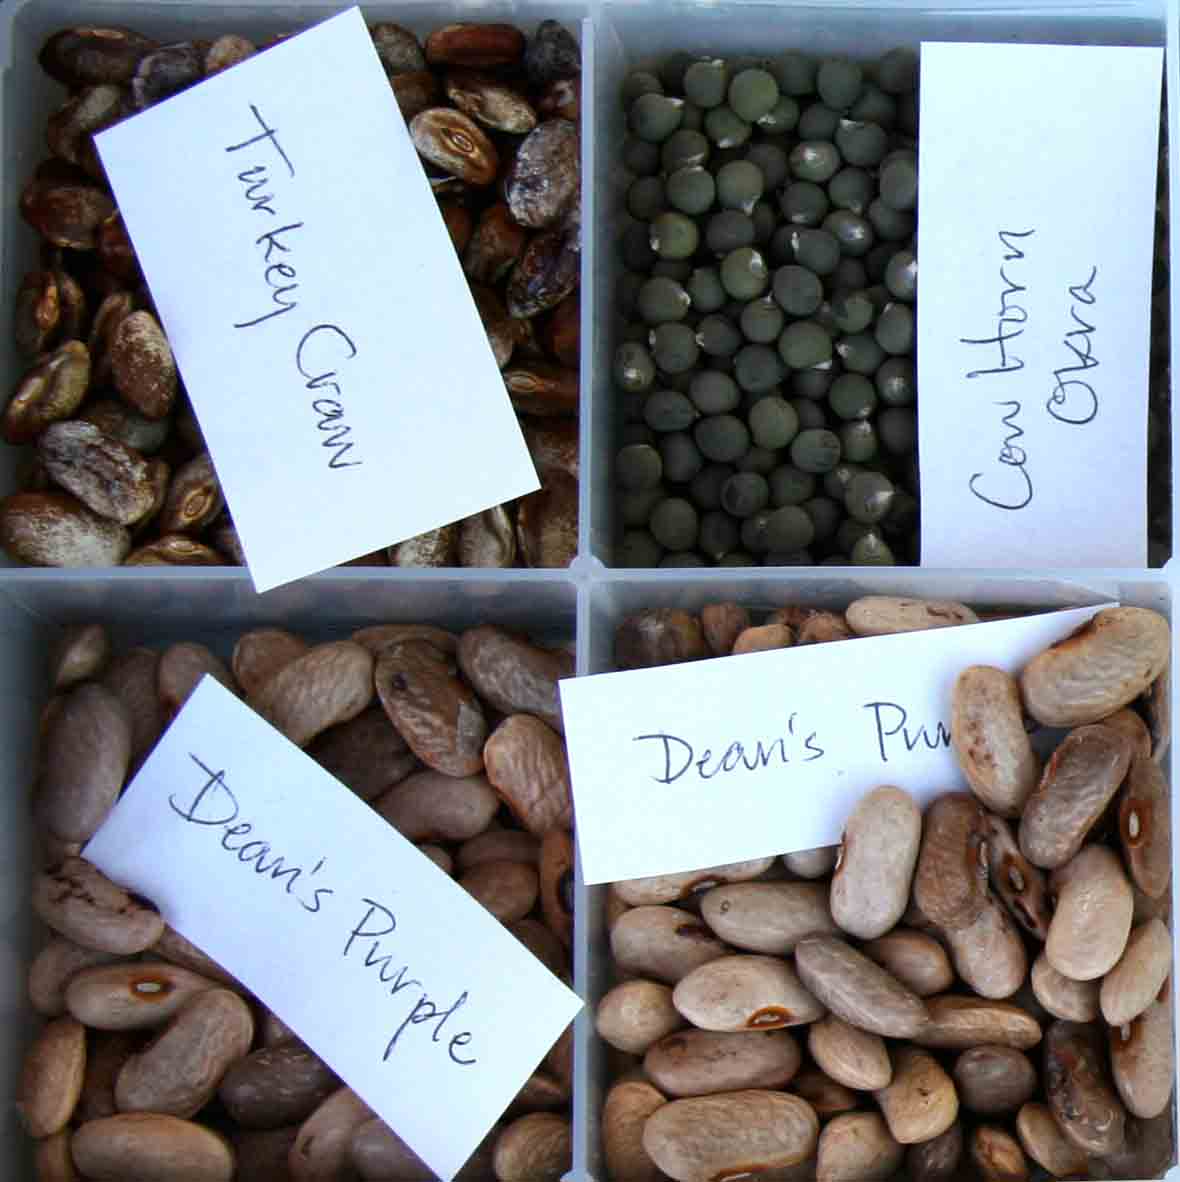 Photos of seeds available at a recent seed swap at the State Botanical Garden of Georgia.